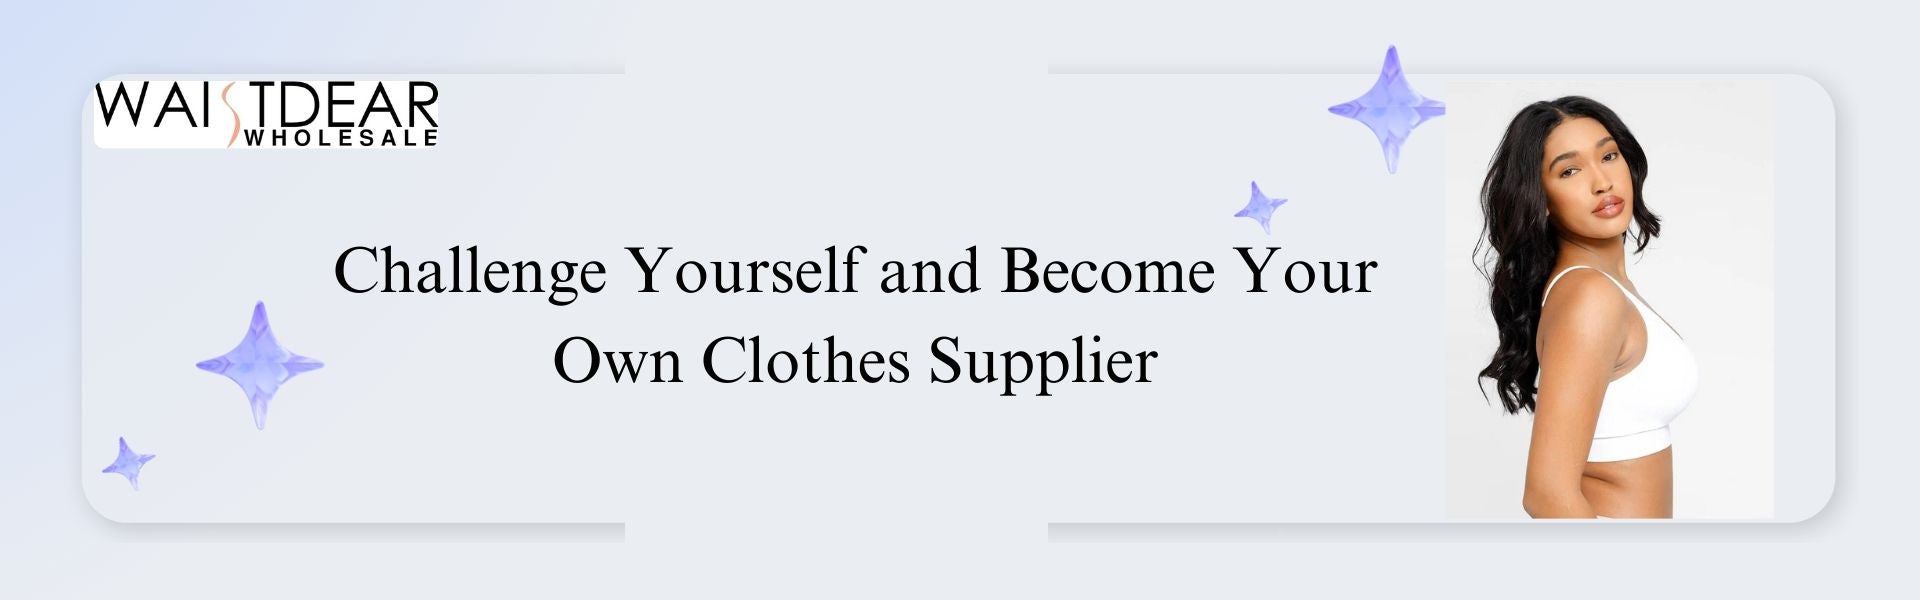 Challenge Yourself and Become Your Own Clothes Supplier